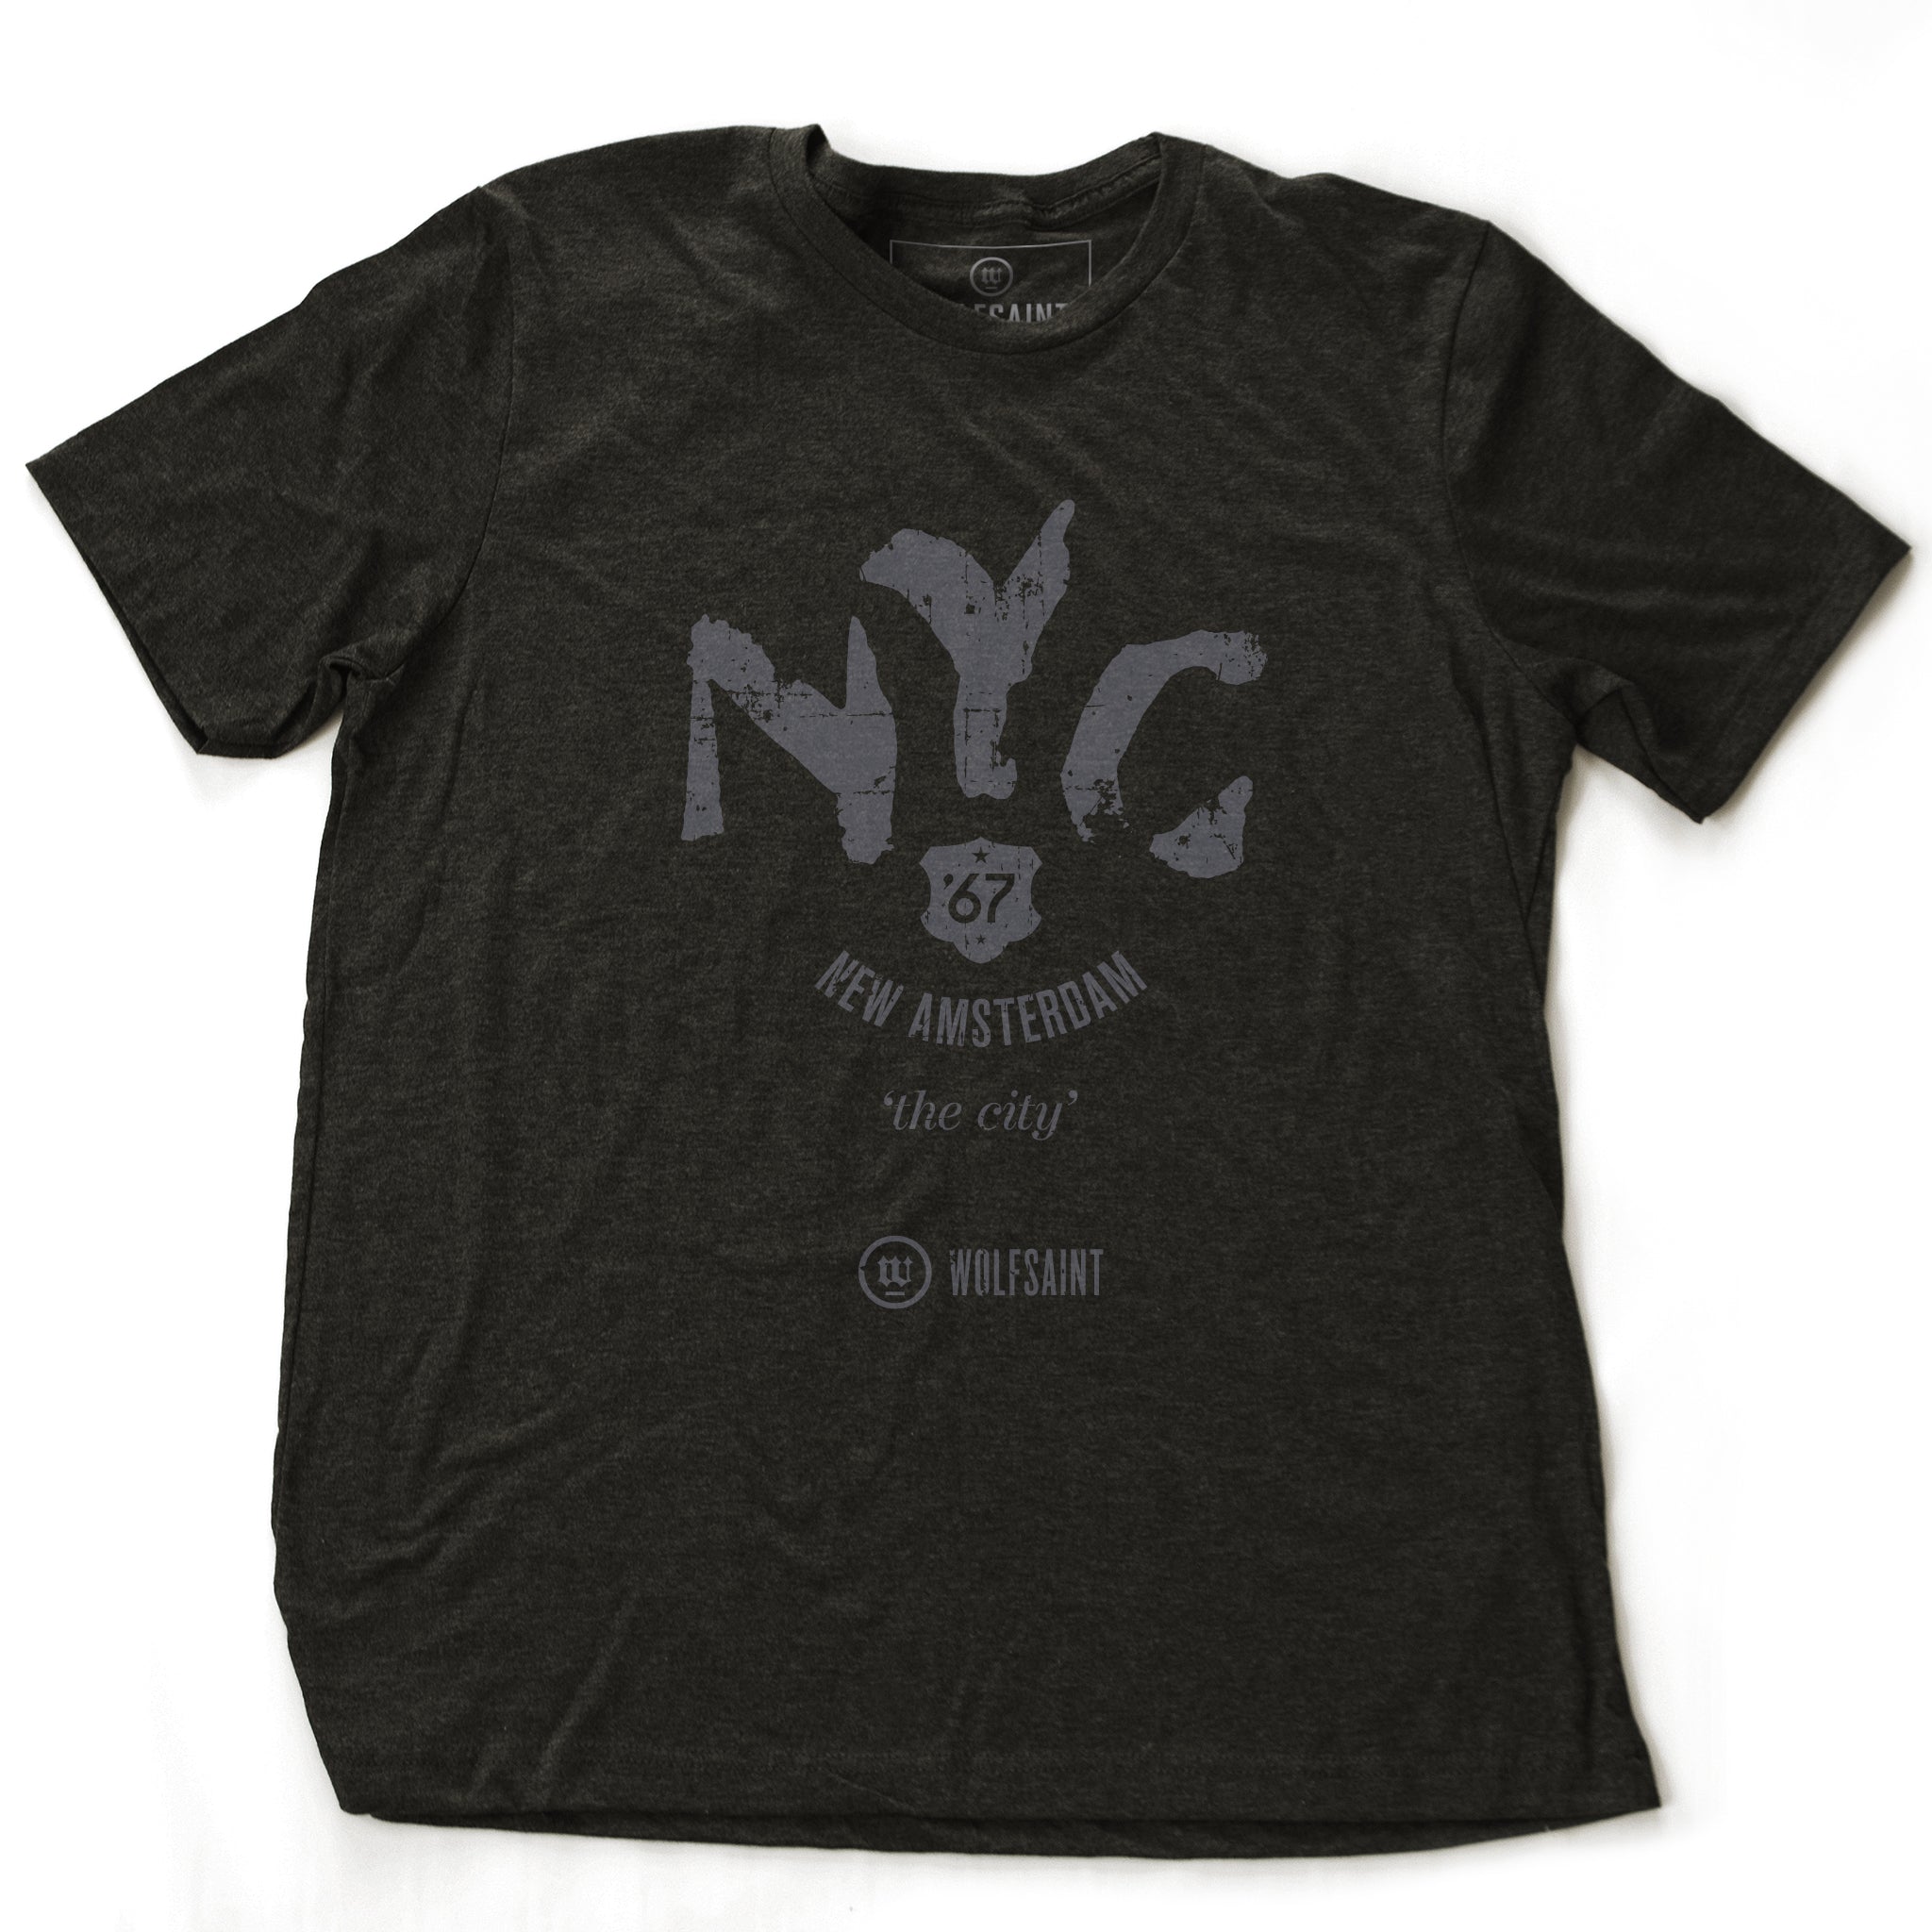 A classic vintage-inspired retro t-shirt in Dark Gray Heather, featuring “NYC” in a large ‘painted’ font, with “New Amsterdam” in a small arc below, then “the city” and then the 